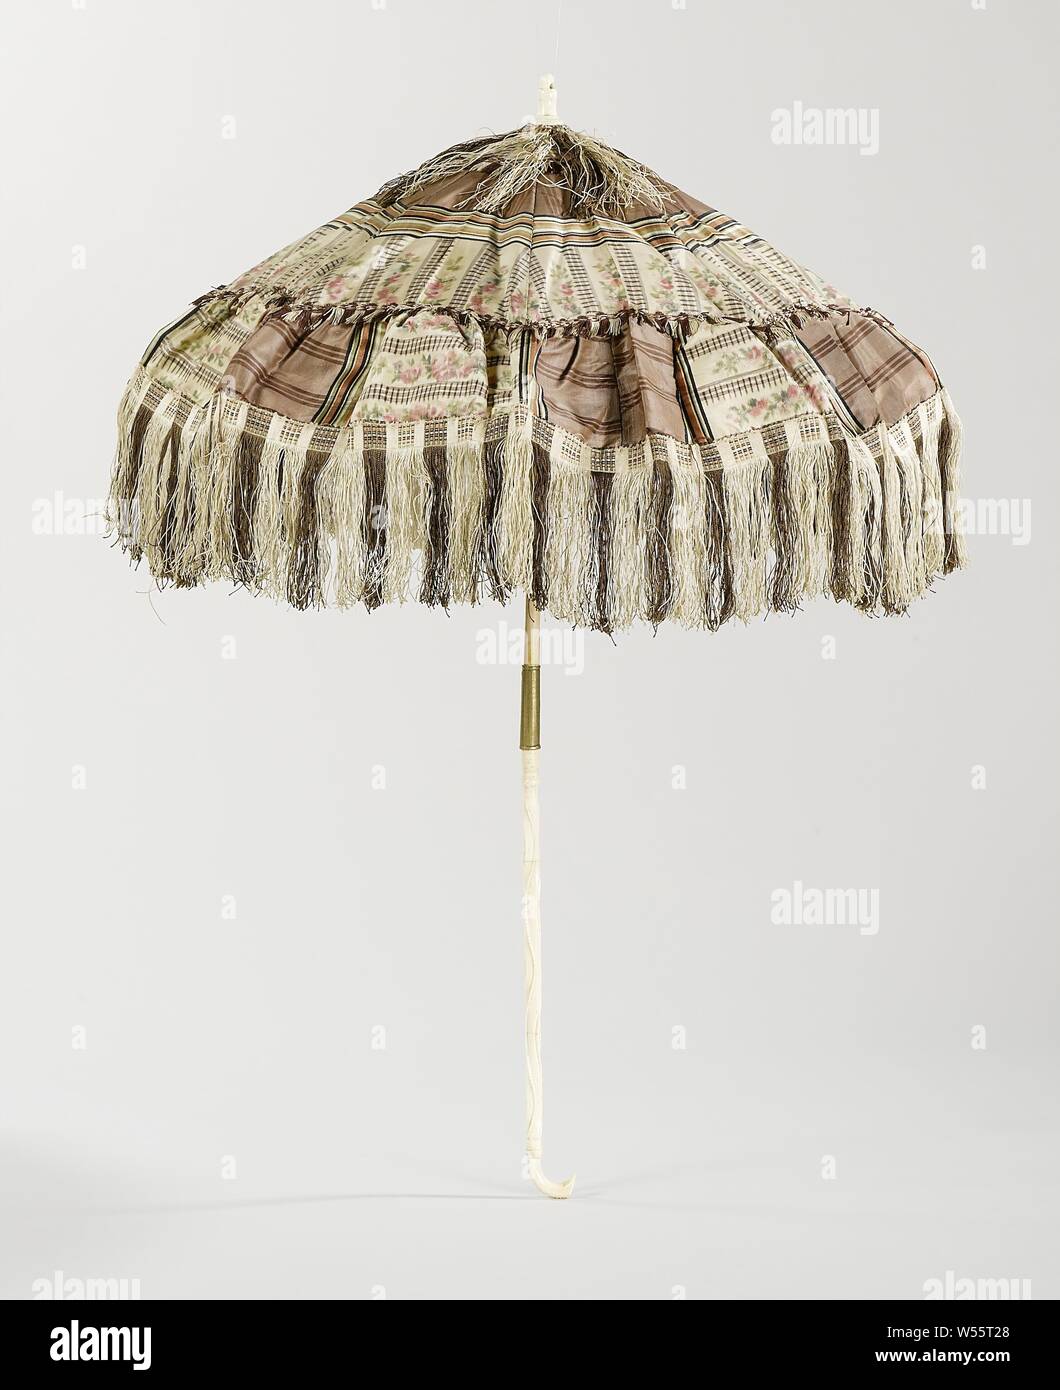 Carriage parasol Carriage parasol with silk-covered deck with brown stripes, interspersed with chiné pattern with rose garlands and gray cross stripes, handle made of wavy-cut leg, Carriage parasol with silk-covered deck with brown stripes, interspersed with chiné pattern with rose garlands and gray cross stripes. Along the edge a brown and white striped fringe. The parasol is lined with white ponjé silk, in which a border of fine, embossed flowers. Dark, wooden ribs. The handle is cut from bone with wave lines, two smoothly profiled and one toothed, with a small curved hook at the bottom Stock Photo